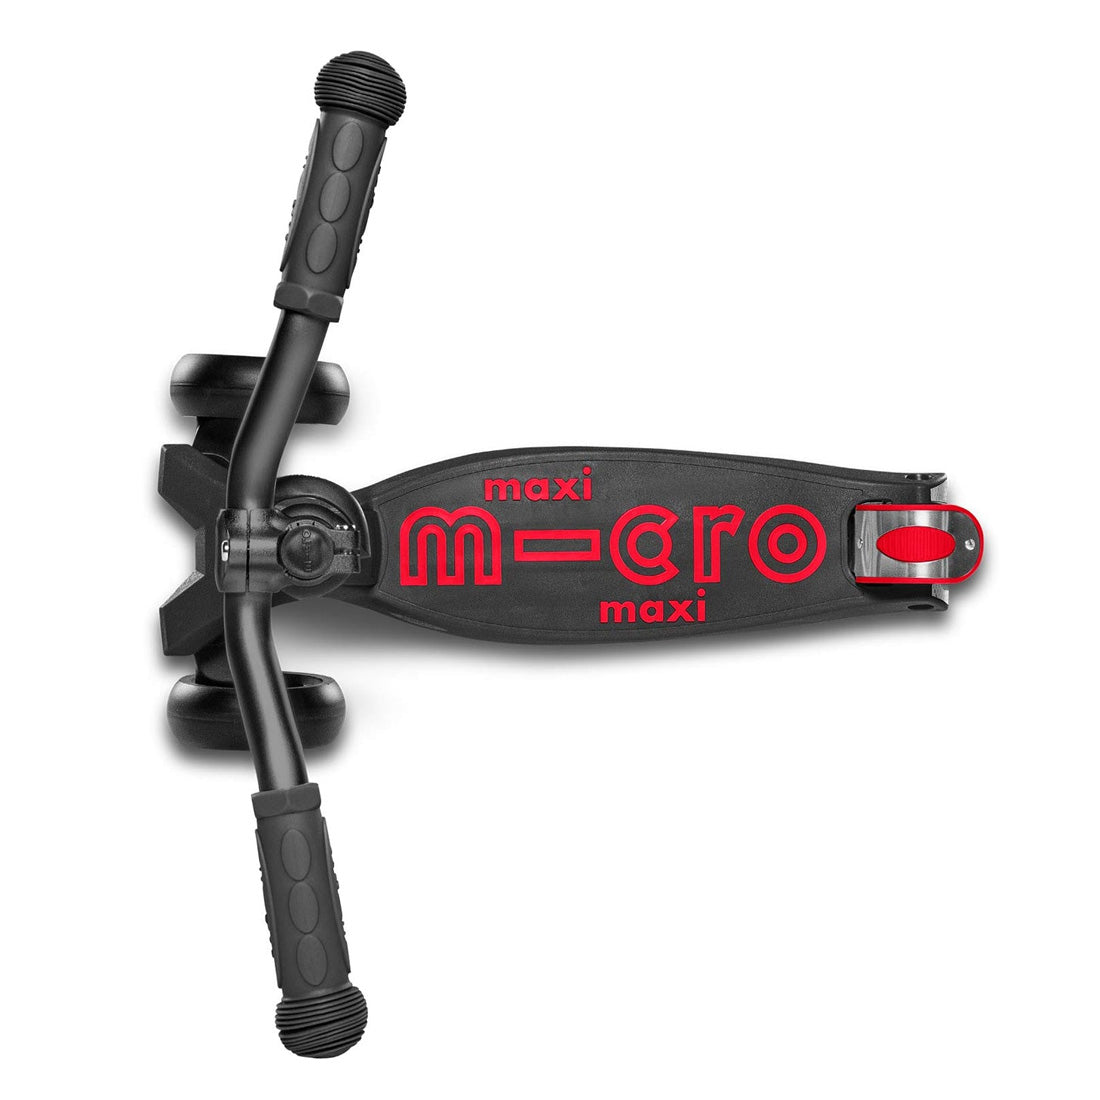 Micro Maxi Deluxe PRO Scooter - Black/Red Scooter Completes Rec